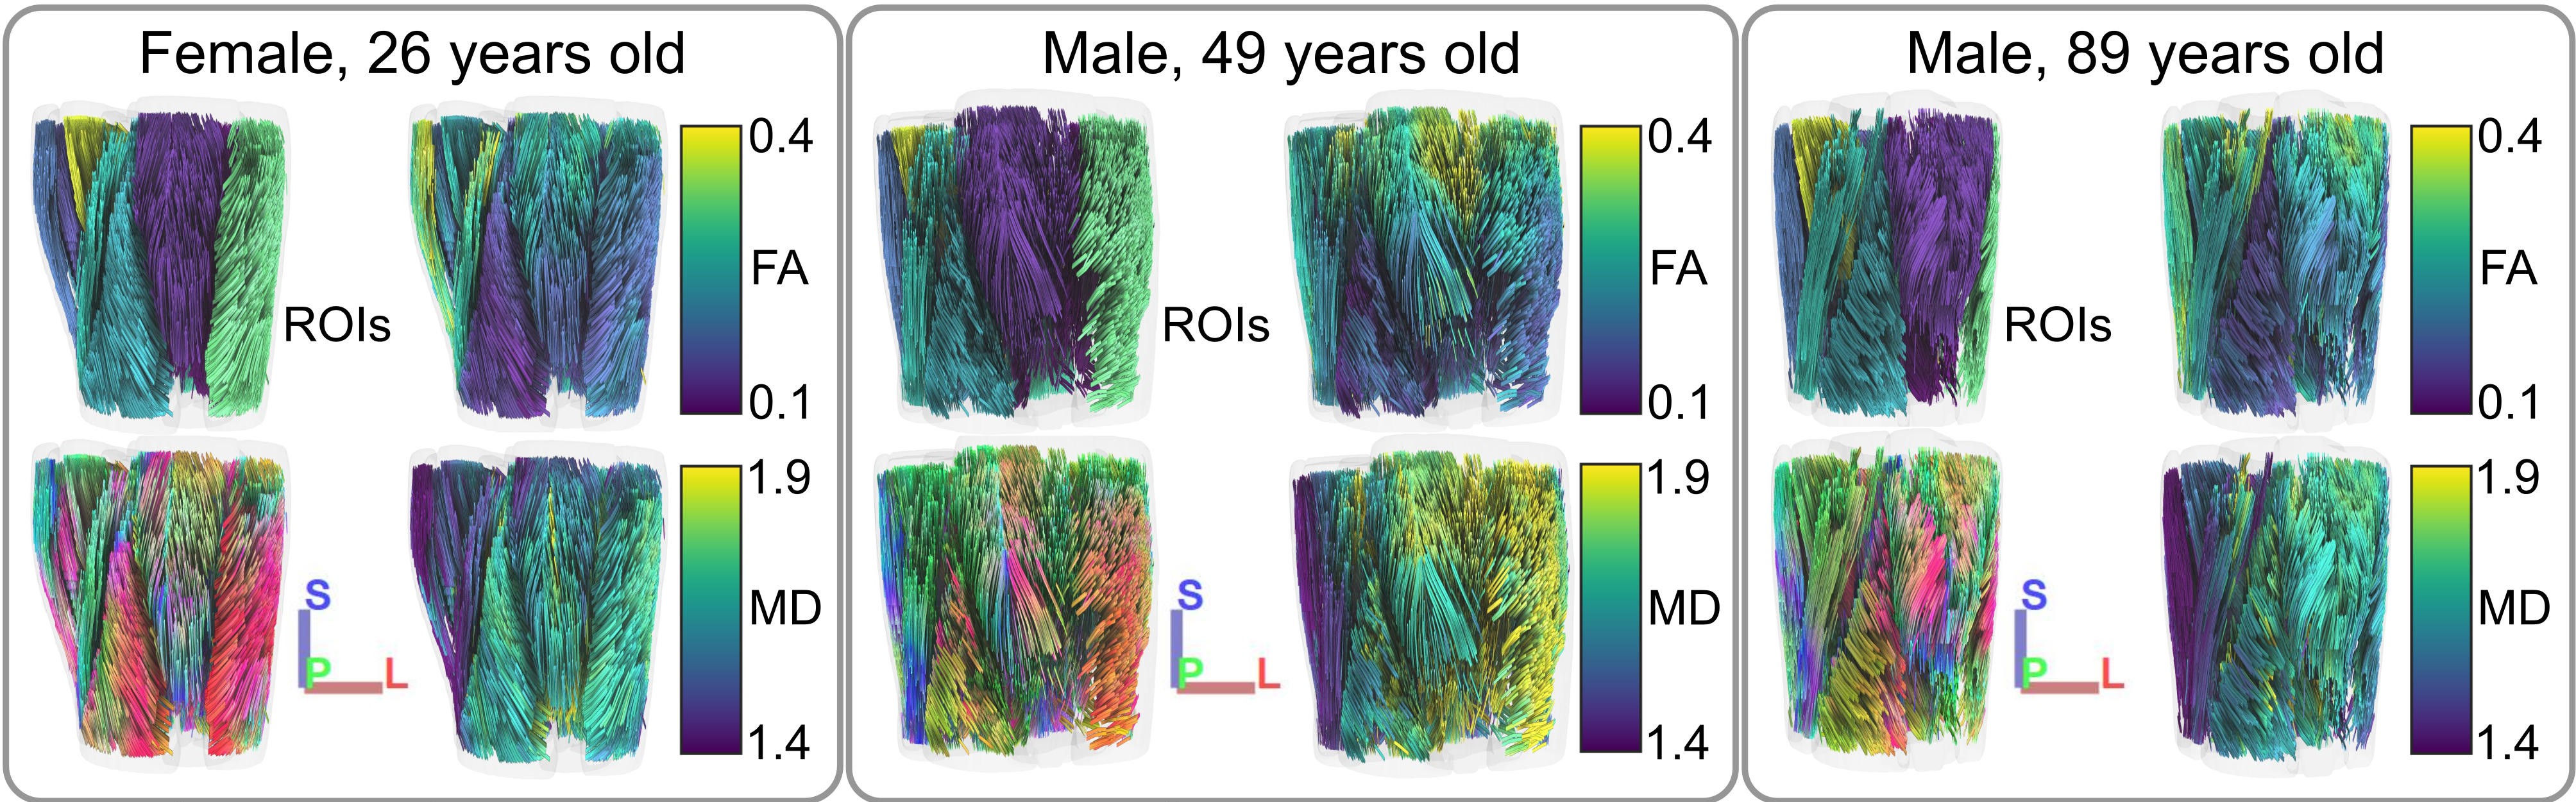 Muscle diffusion MRI in ageing